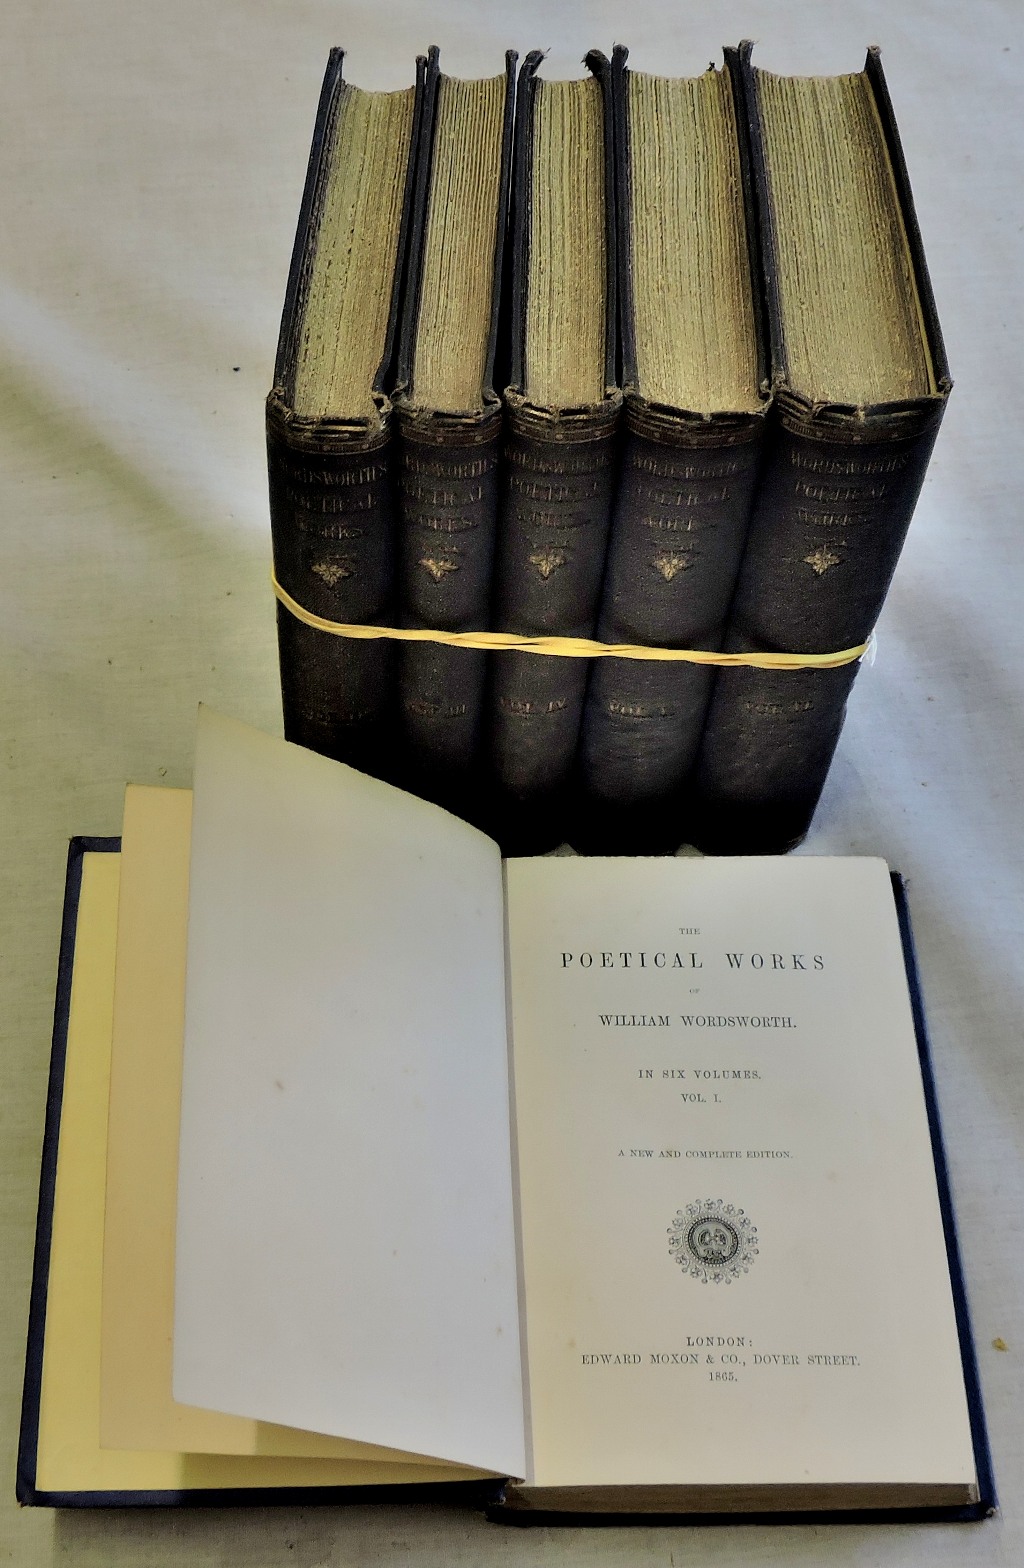 The poetical Works of William Wordsworth in 6 Volumes. Published, London Edward Moxon & Co. 1865. - Image 2 of 2